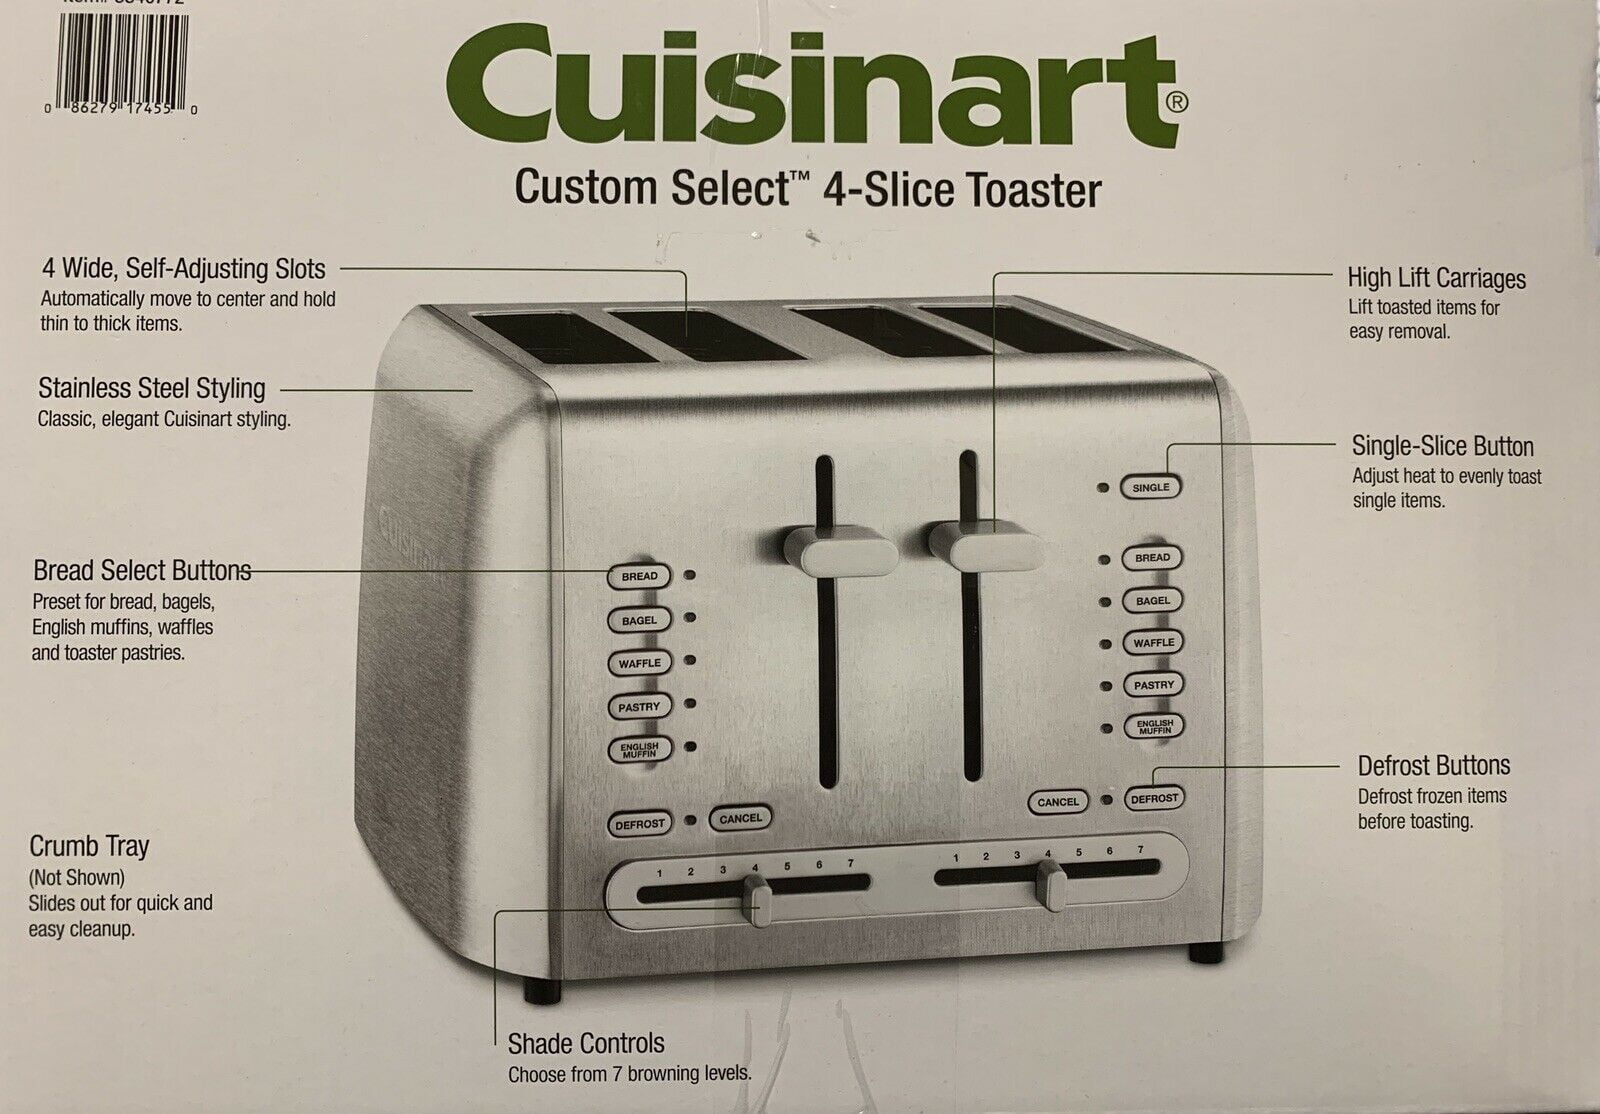 Cuisinart Toaster Style - CPT180PIE - 4 slots - defrost function